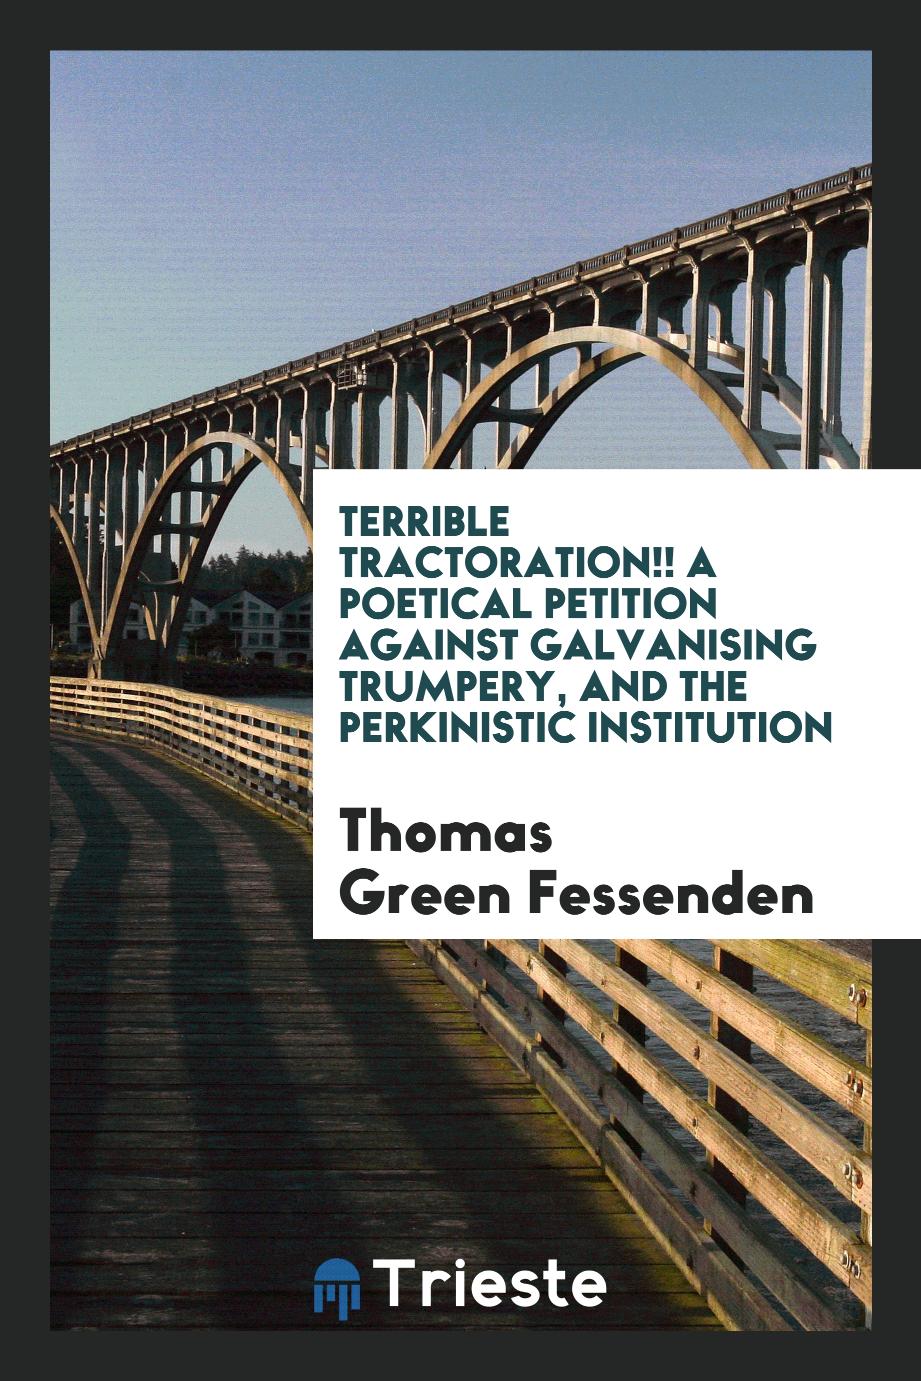 Terrible tractoration!! A poetical petition against galvanising trumpery, and the Perkinistic institution